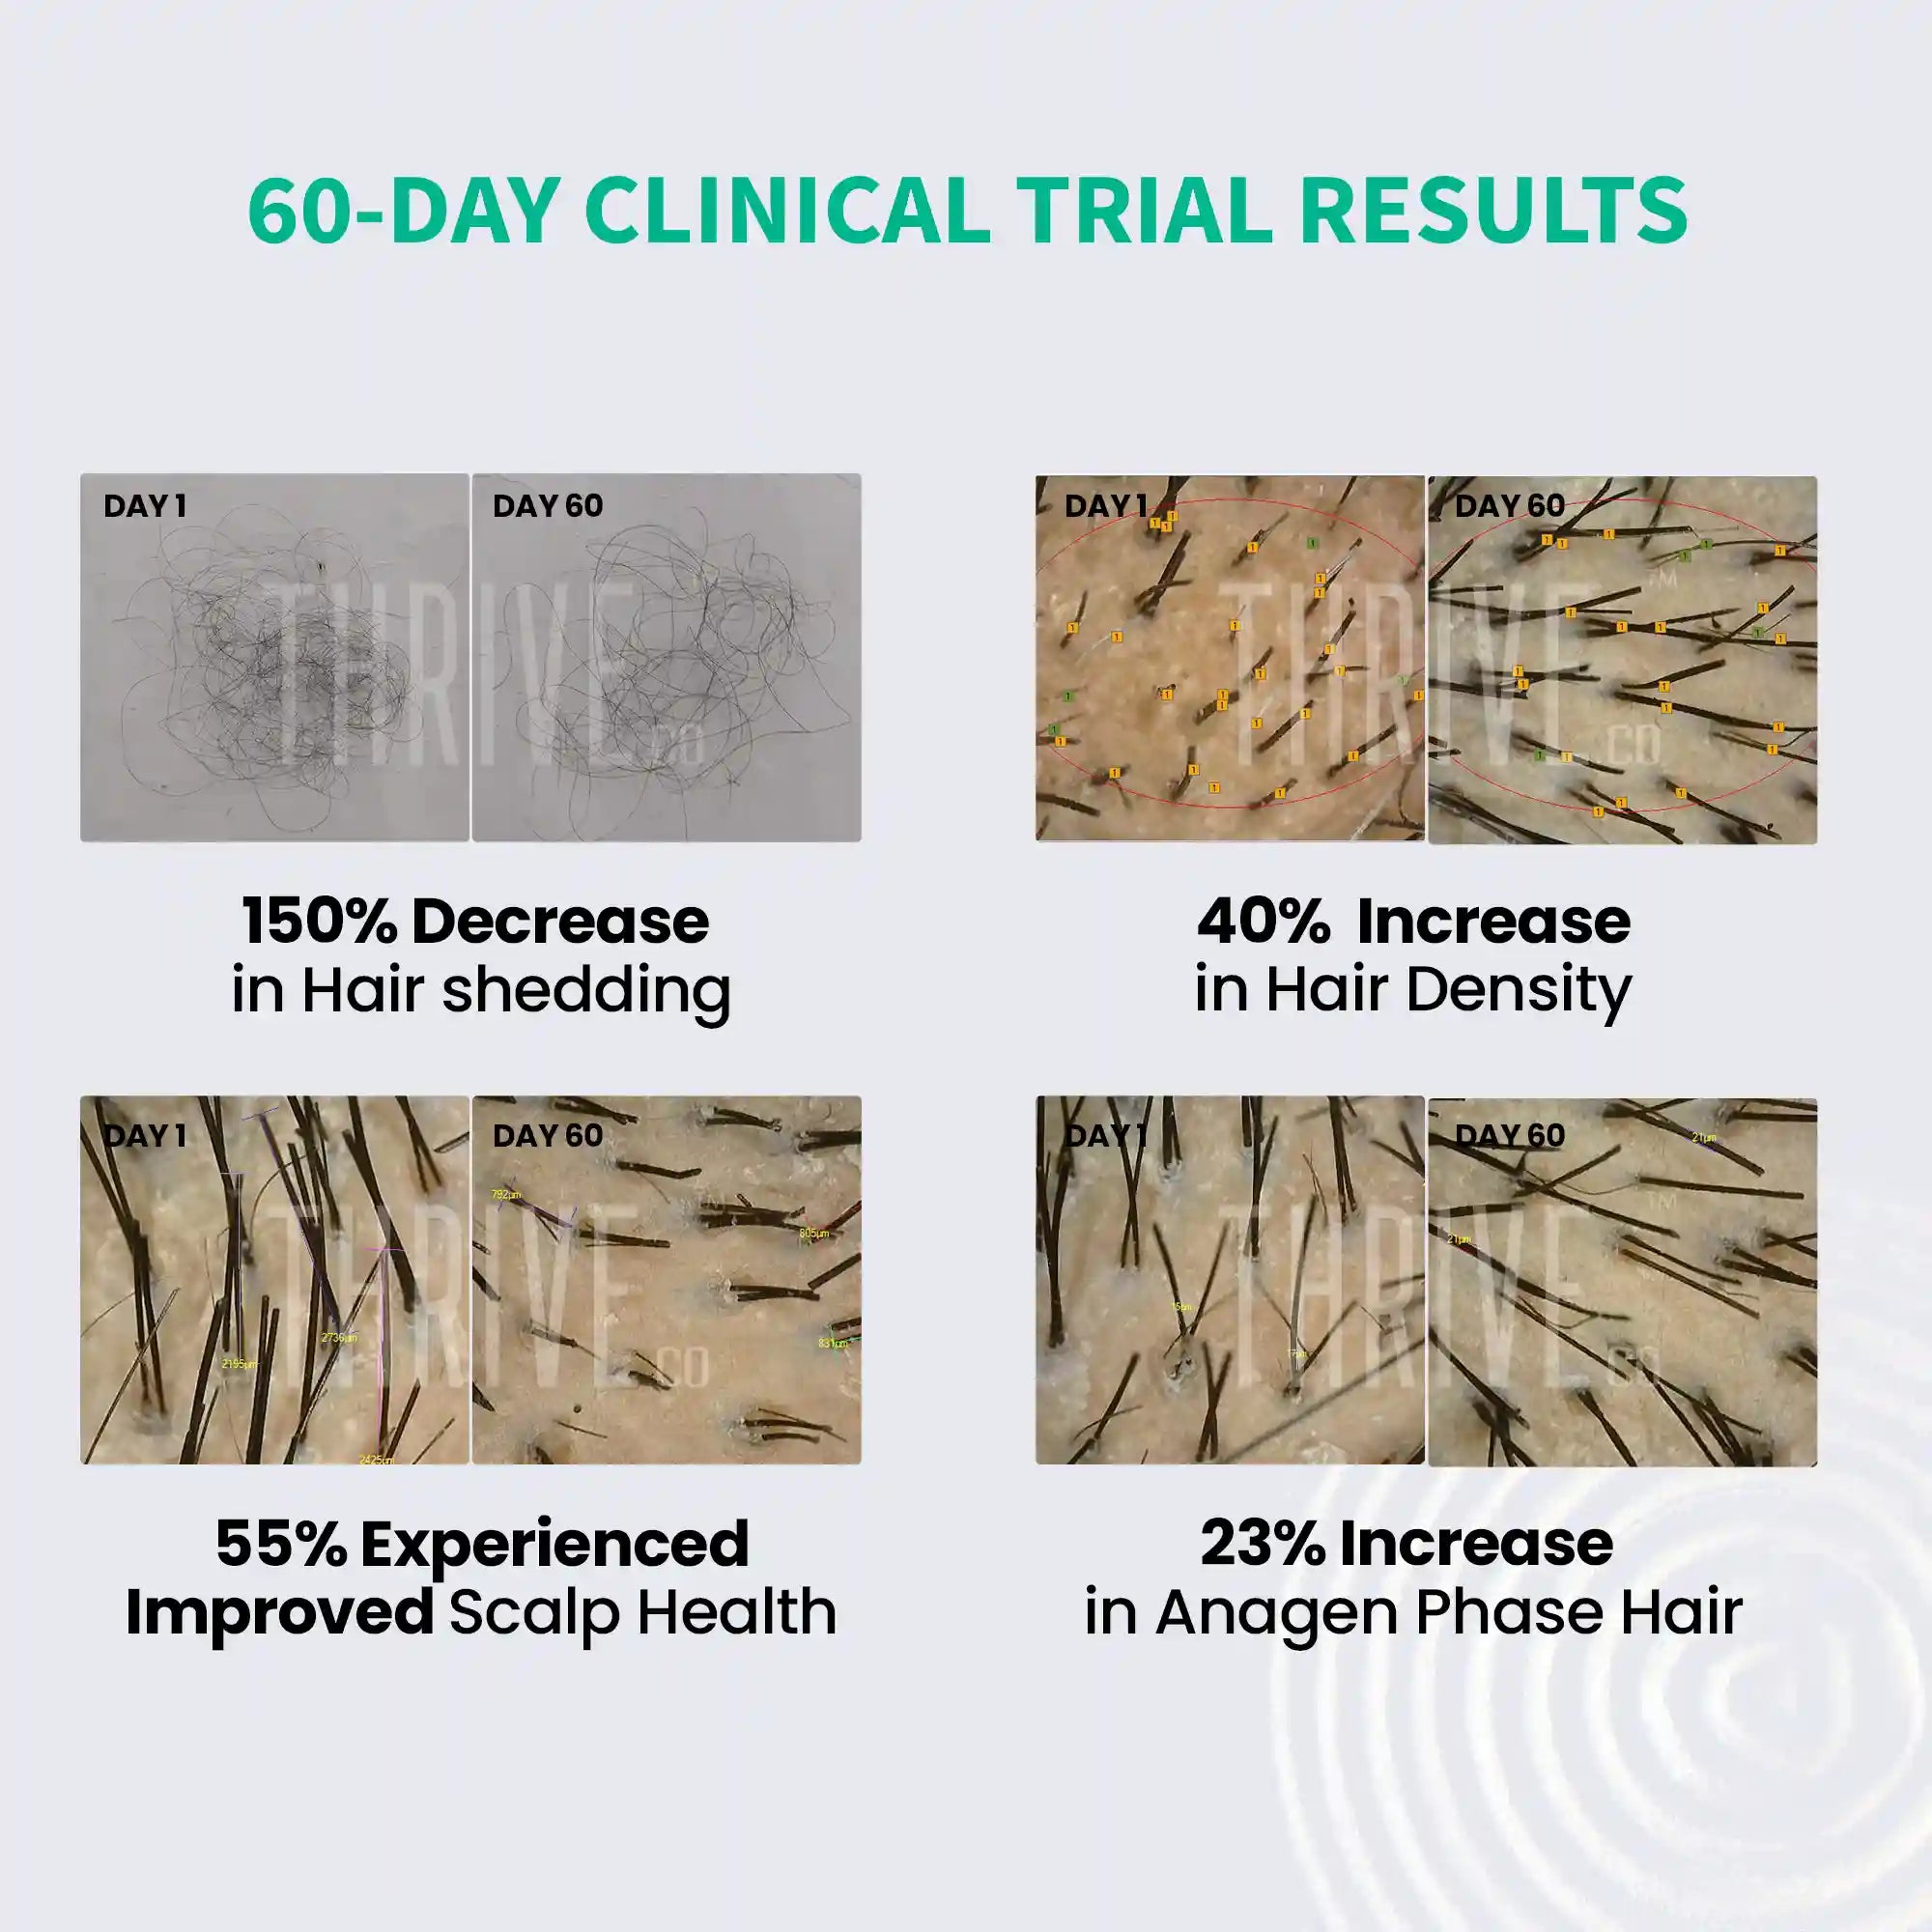 60 day clinical trial results of thriveco hair growth serum for men